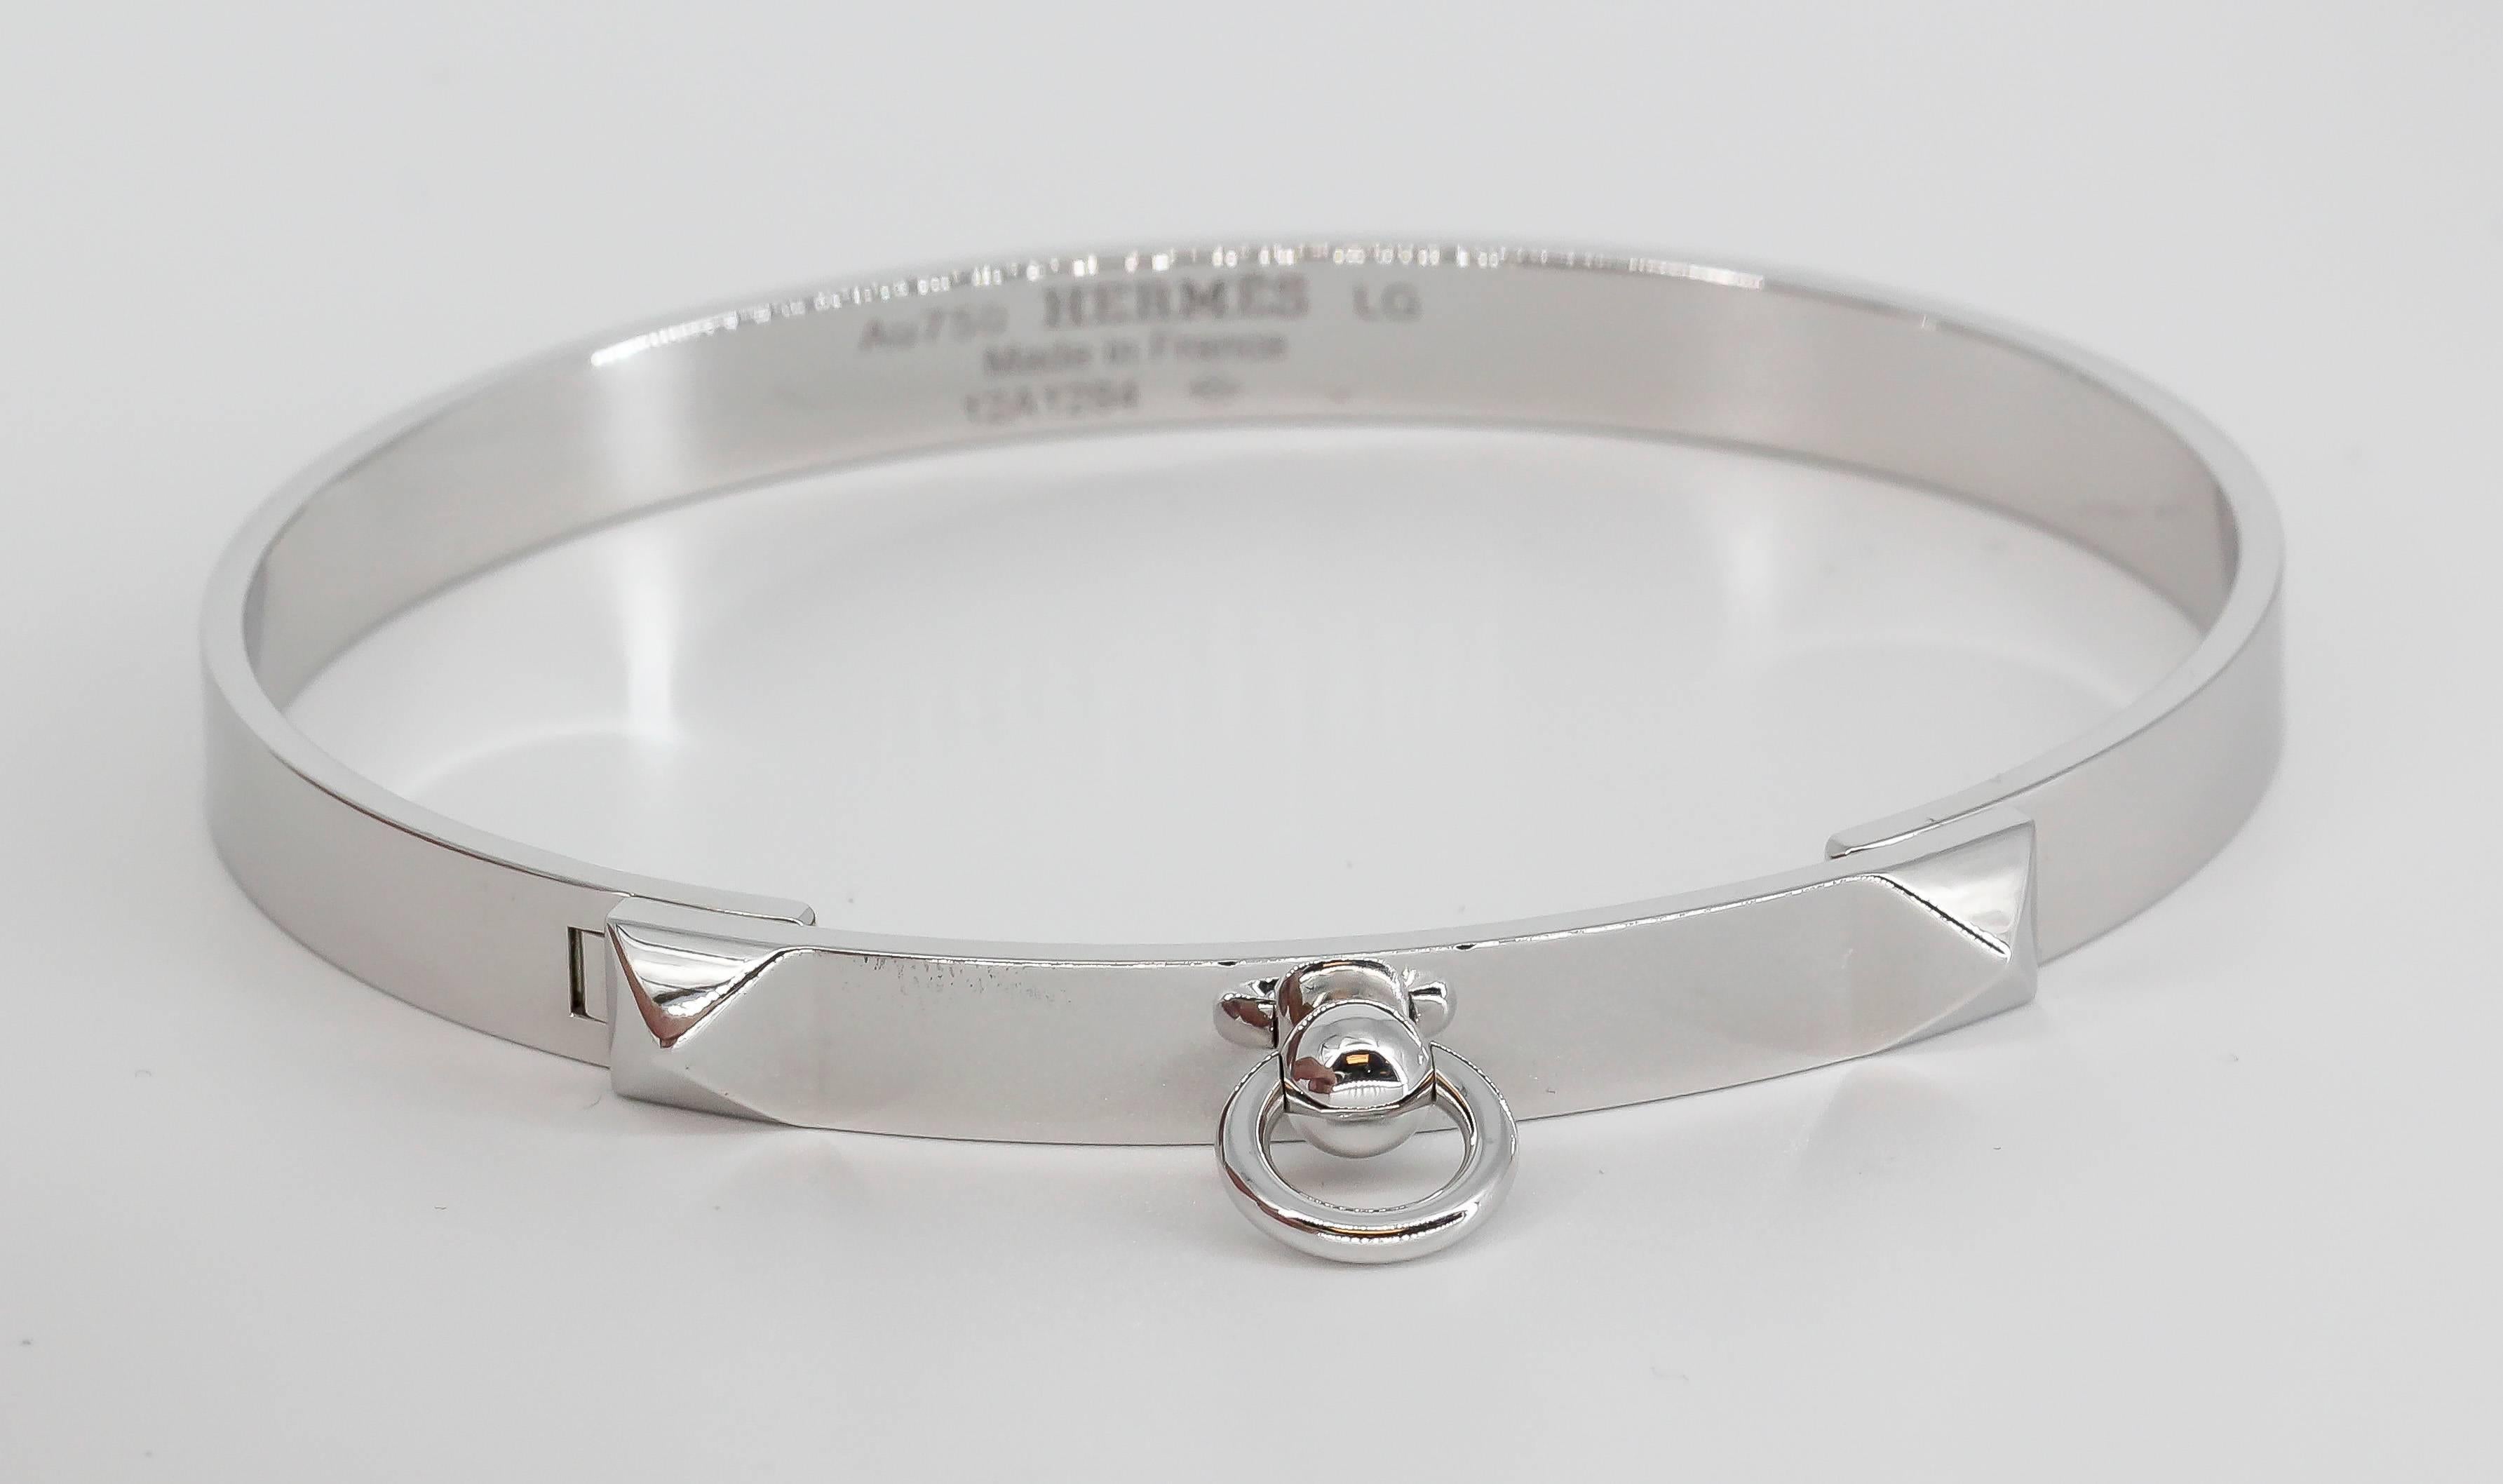 Cool 18K White Gold bangle bracelet from the "Collier de Chien" collection by Hermes. Large size.  Current retail $7500.

Hallmarks: Hermes, AU750, reference numbers, French 18K gold assay mark, maker's mark.